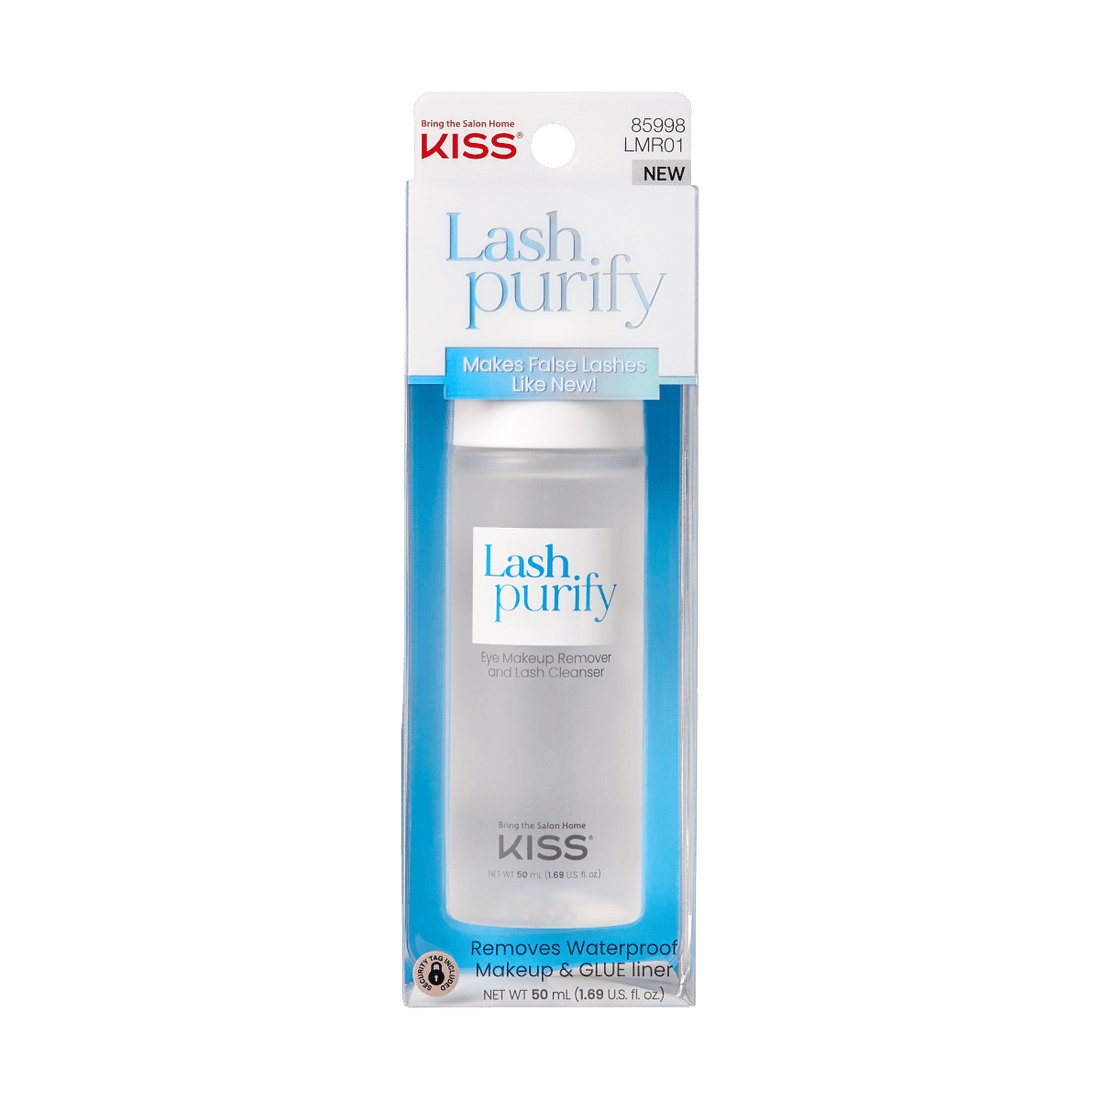 KISS Lash Purify, Eye Makeup Remover and Lash Cleanser